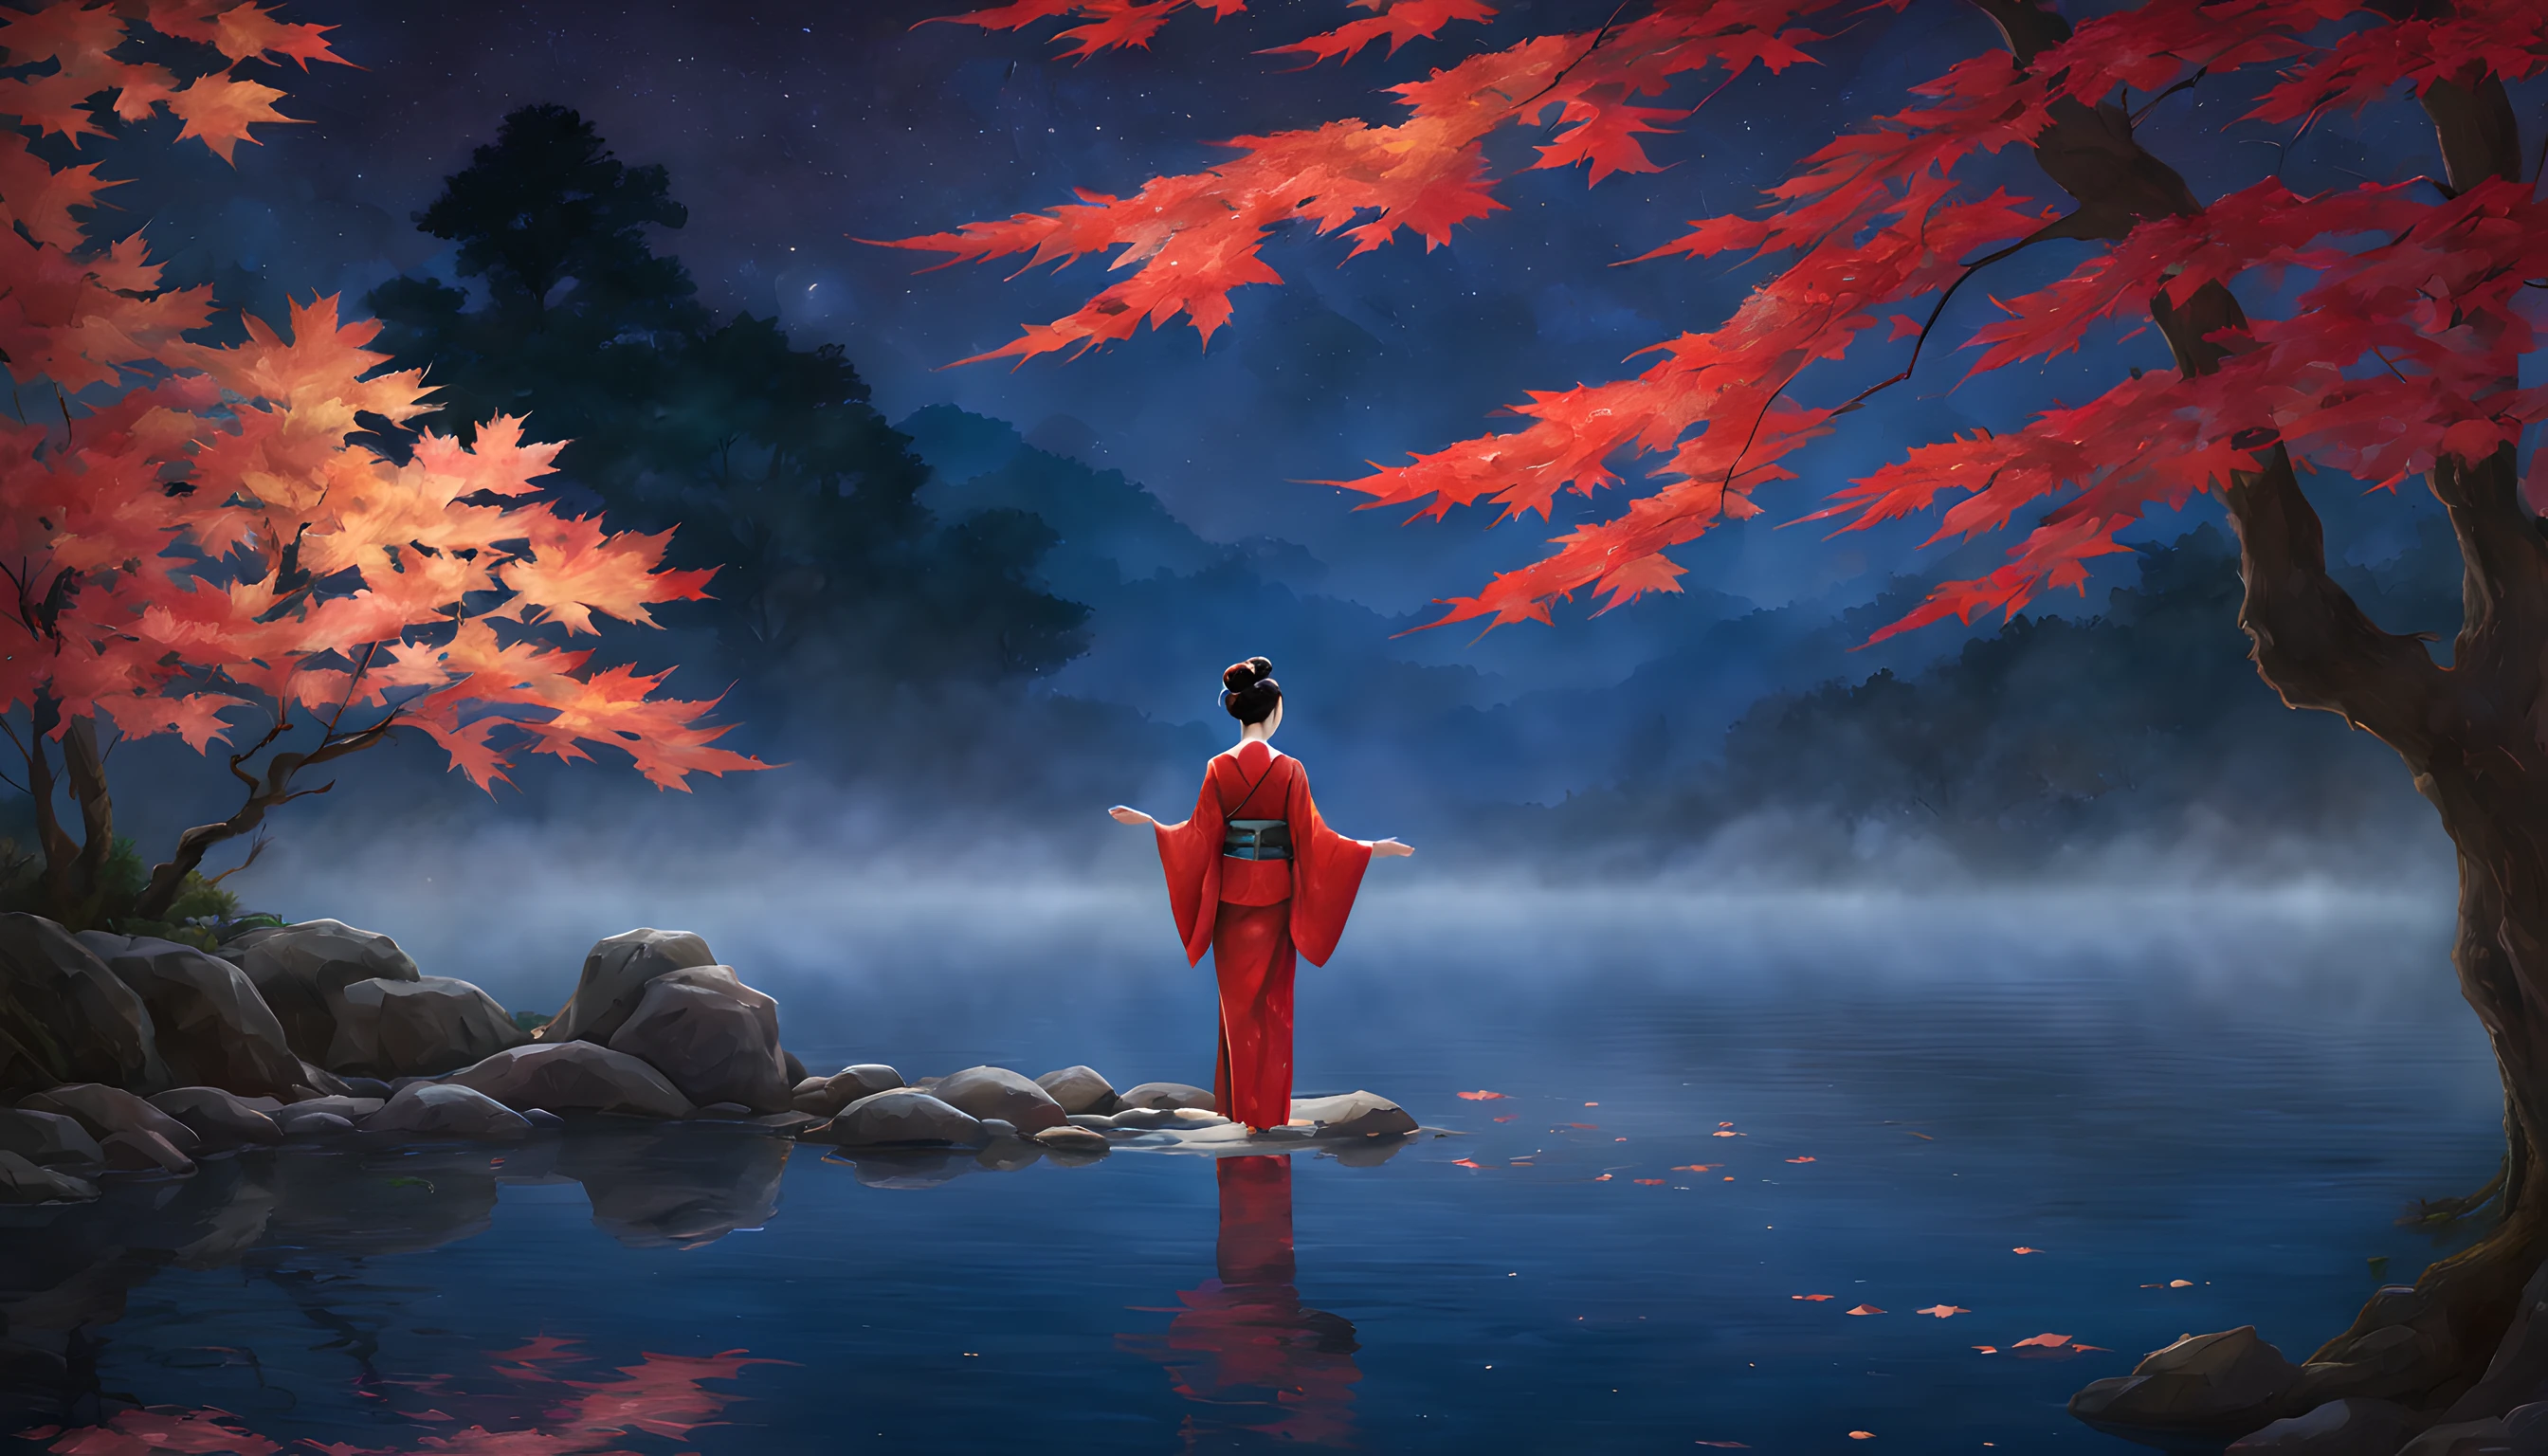 "Compose a captivating nocturnal scene featuring a tranquil pond enveloped by the fiery hues of maple leaf autumn foliage. The composition should emphasize the prominence of the maple leaves and the majestic maple tree that stands nearby. In the foreground, a Japanese woman in her 40s stands gracefully, draped in a vibrant red kimono. The kimono accentuates her elegance, and her beauty radiates beneath the moonlight. She is a vision of timeless allure, capturing the essence of the season. The woman gazes upon the shimmering pond, where the reflection of the maple leaves dances upon the water's surface. Her expression is one of serene contemplation, as she immerses herself in the tranquil beauty of the night. The background showcases the magnificent maple tree, its branches adorned with resplendent leaves that seem to catch the moonlight. The pond reflects the ethereal scene, adding to the enchantment of the moment. The overall composition should create a sense of serenity and reverence for nature's beauty. Ensure that the woman's captivating beauty and the brilliance of the maple leaves take center stage in this mesmerizing autumn tableau."